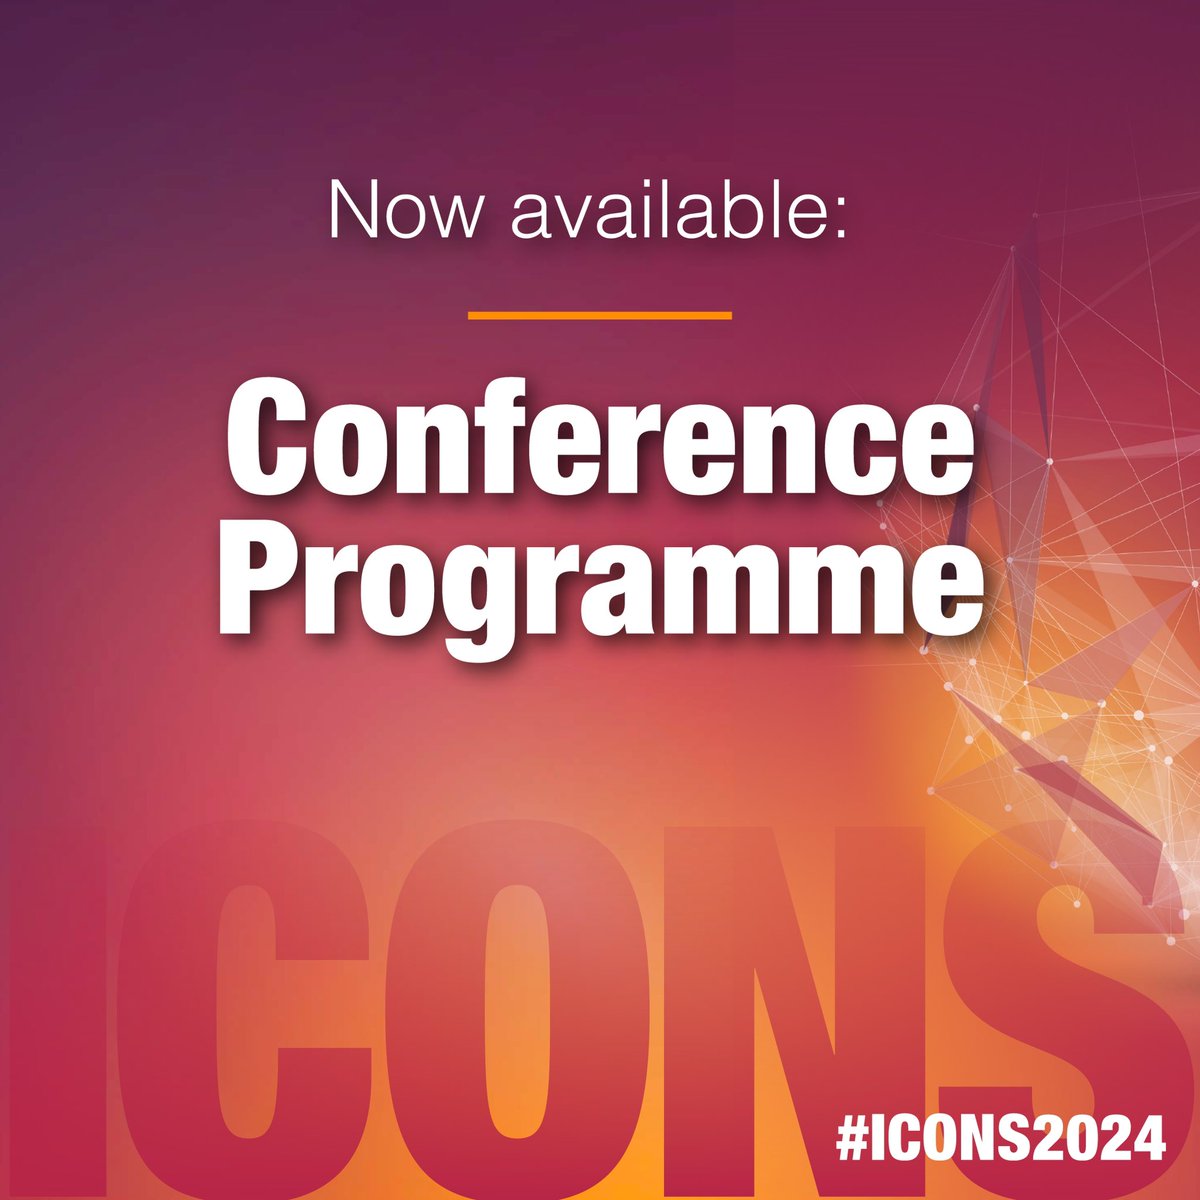 The #ICONS2024 Programme is now available! Check out the full list of events and start planning your week.
↪️ atoms.iaea.org/3wqAkWN

Ministerial and plenary sessions will be available on livestream.
▶️ iaea.org/events/icons20…